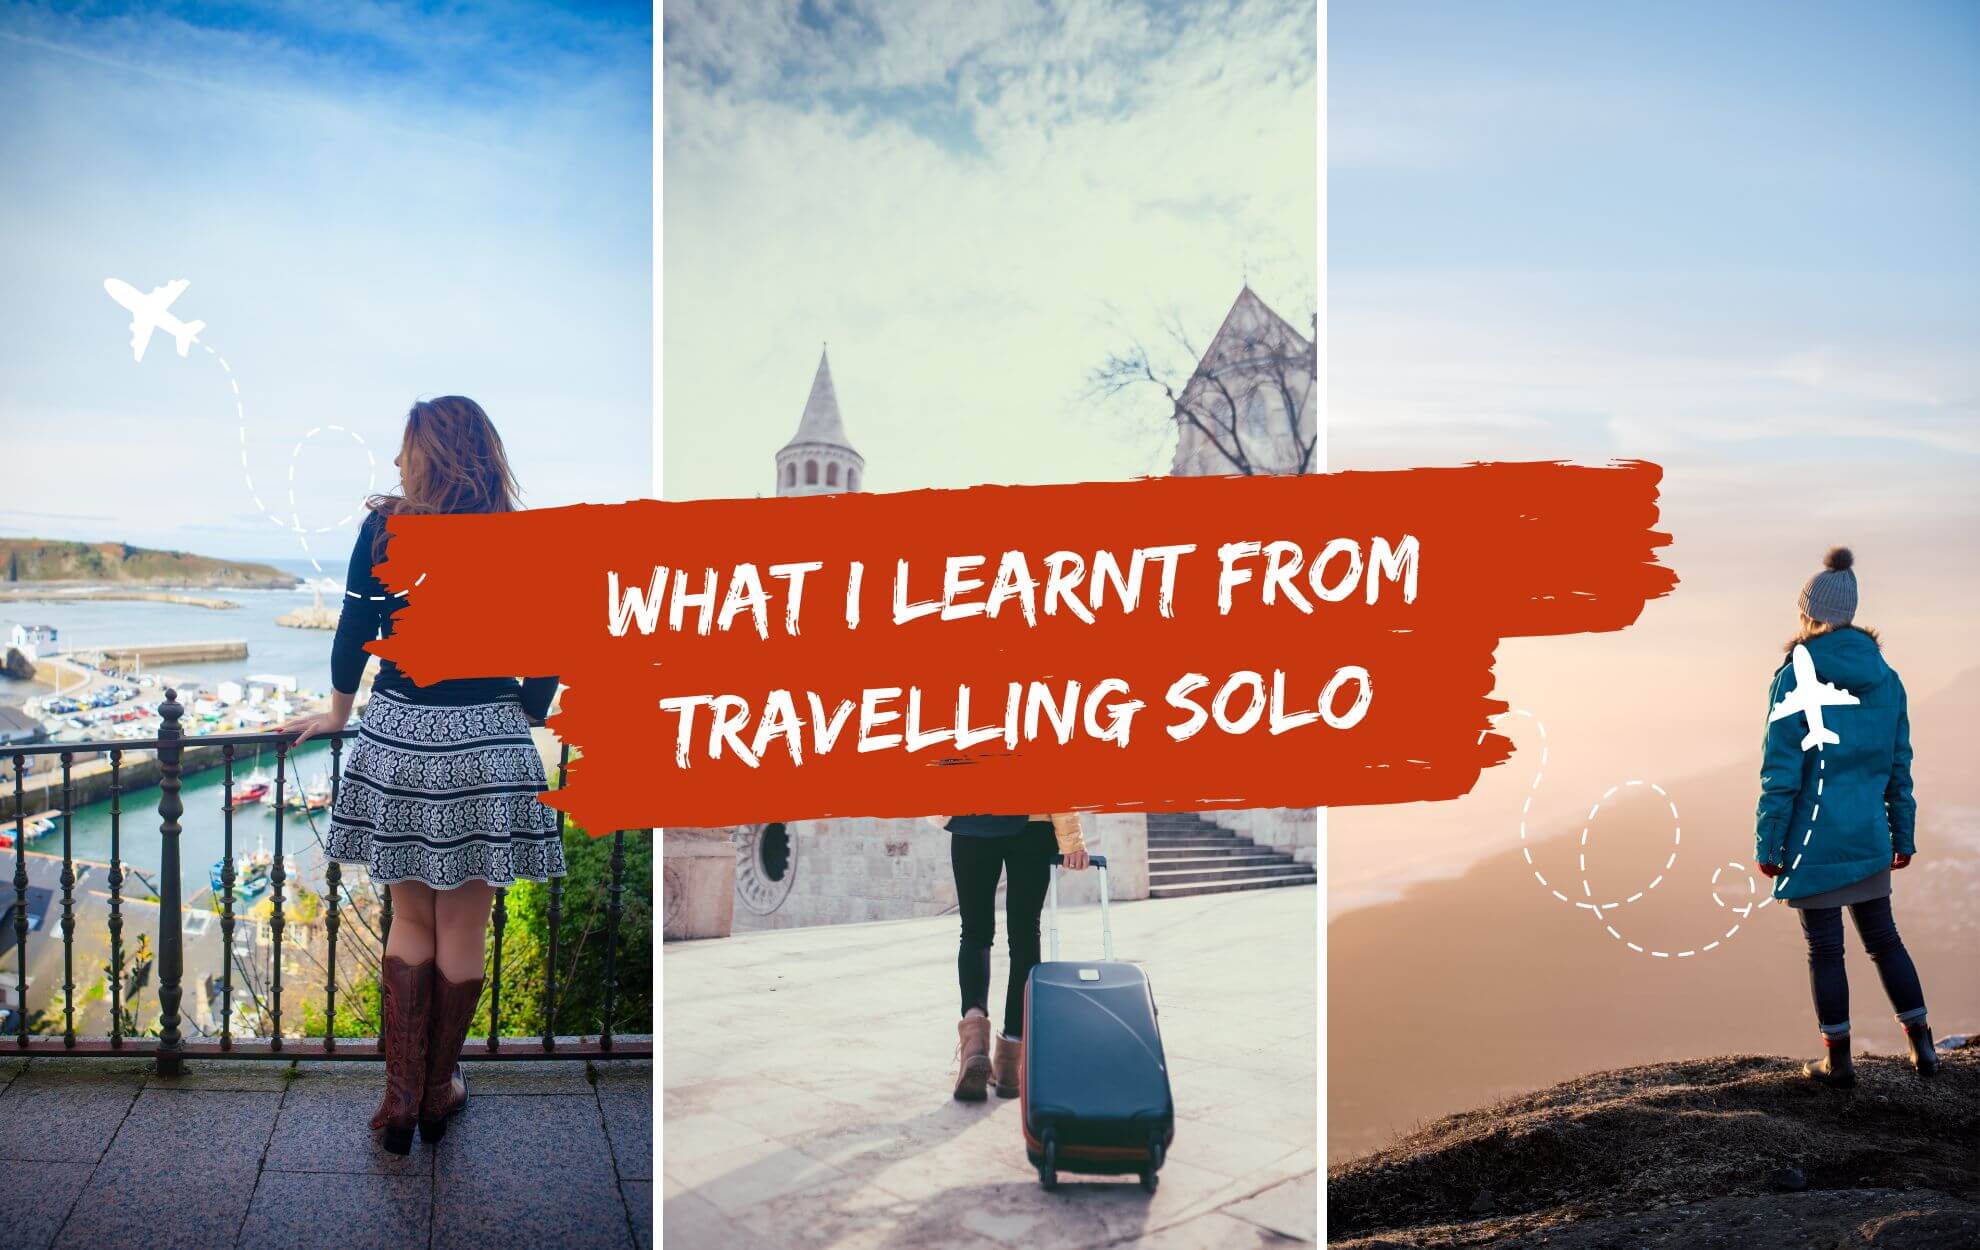 What I Learnt From Travelling Solo